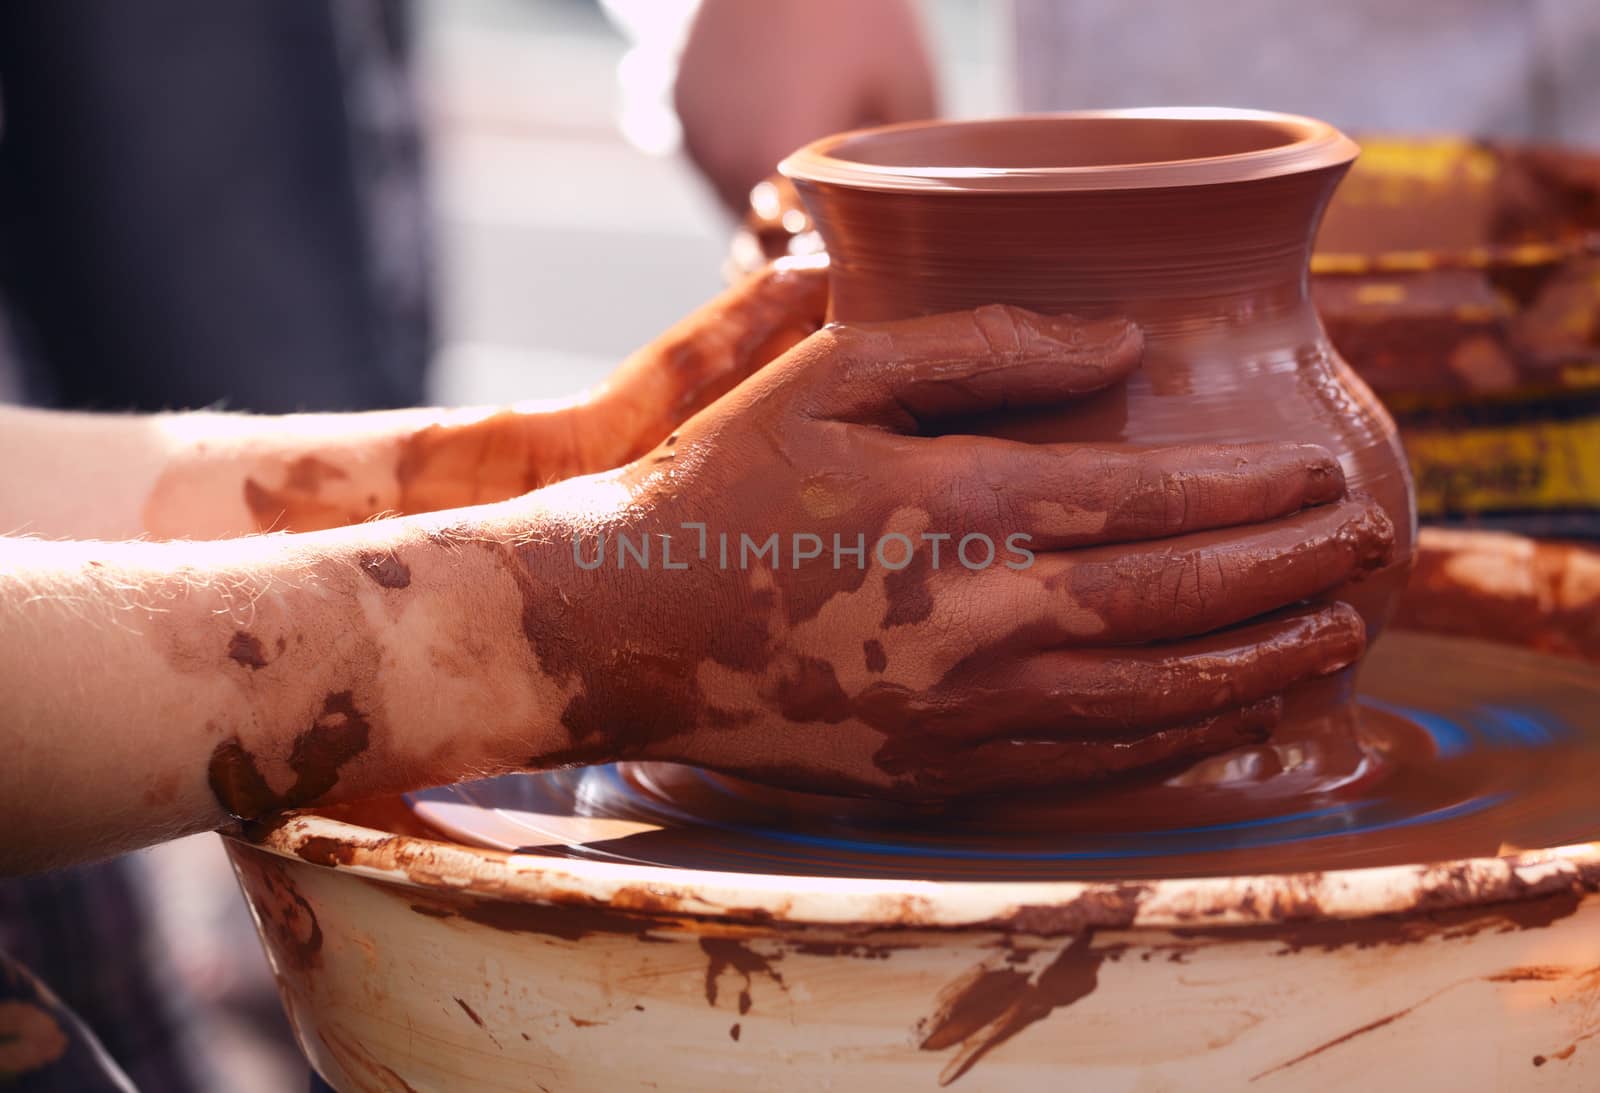 Potter making the pot in traditional style. Close up.